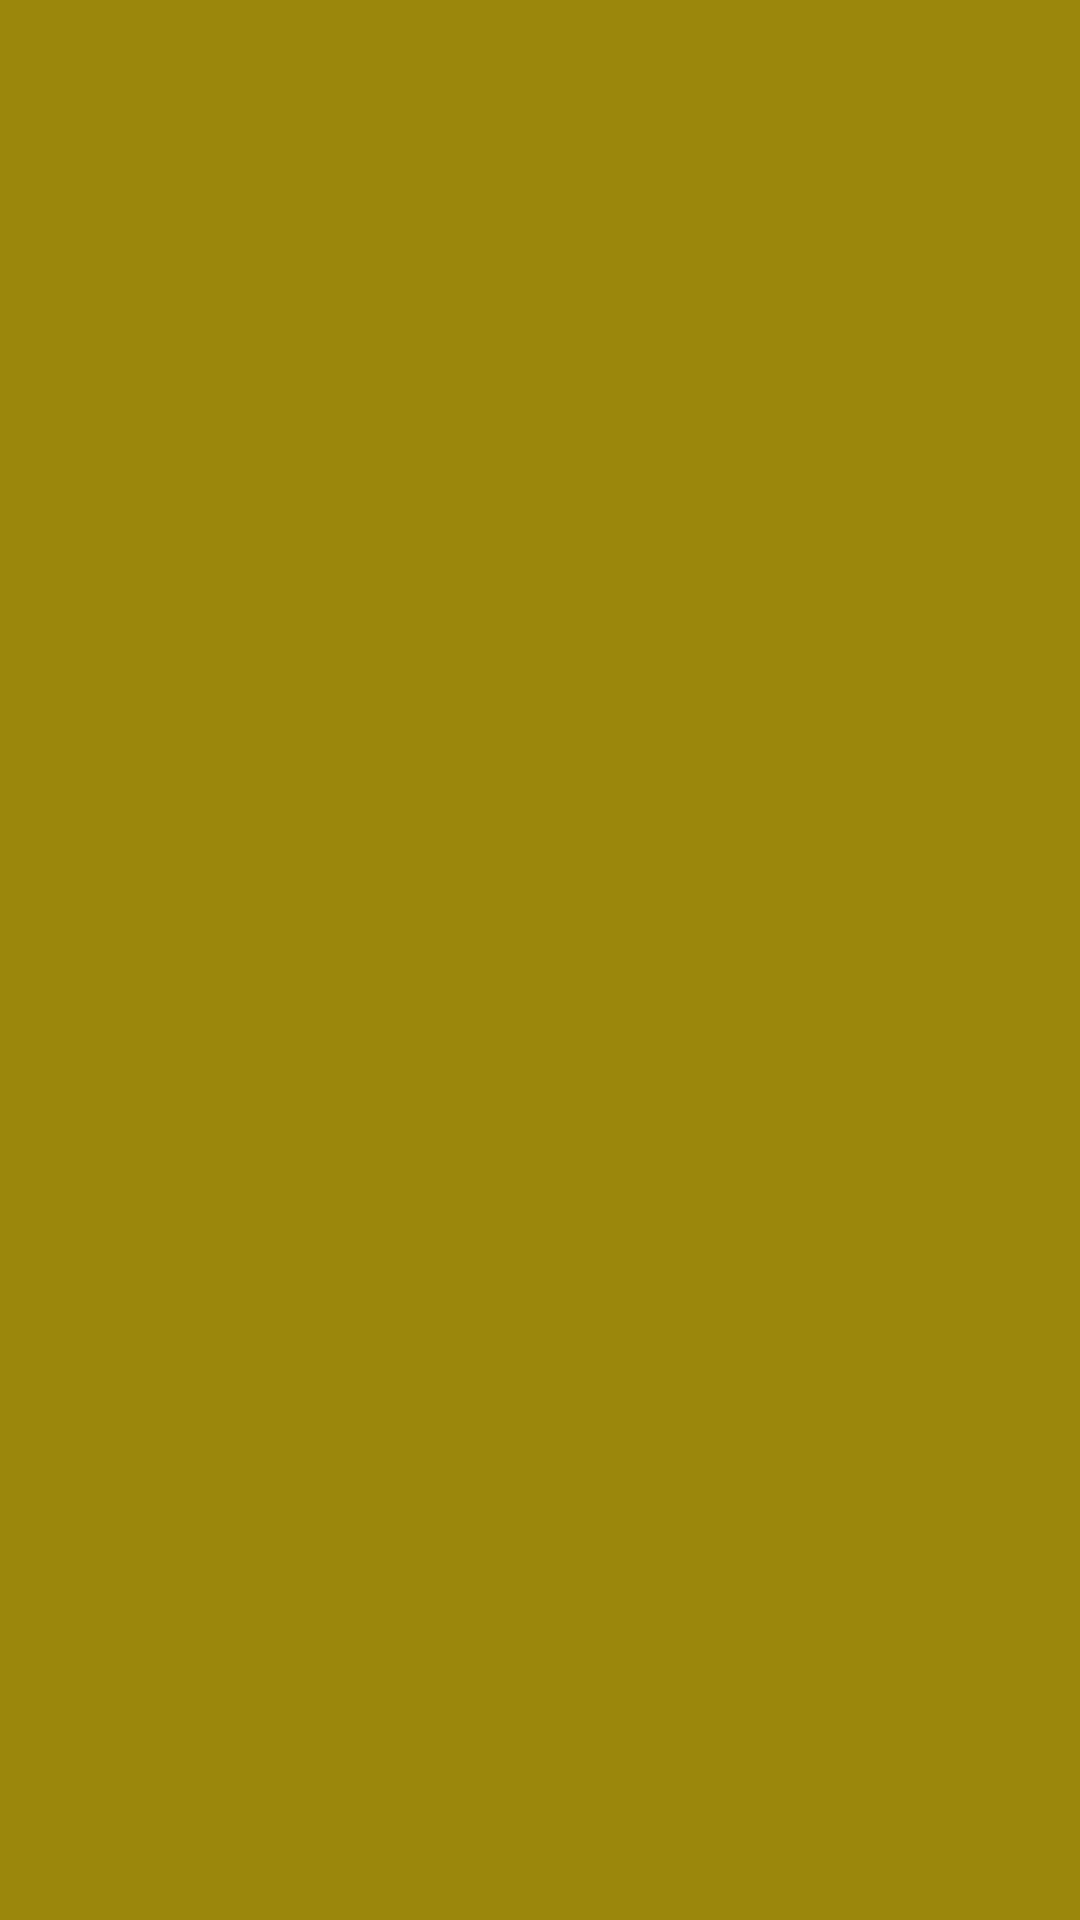 1080x1920 Dark Yellow Solid Color Background